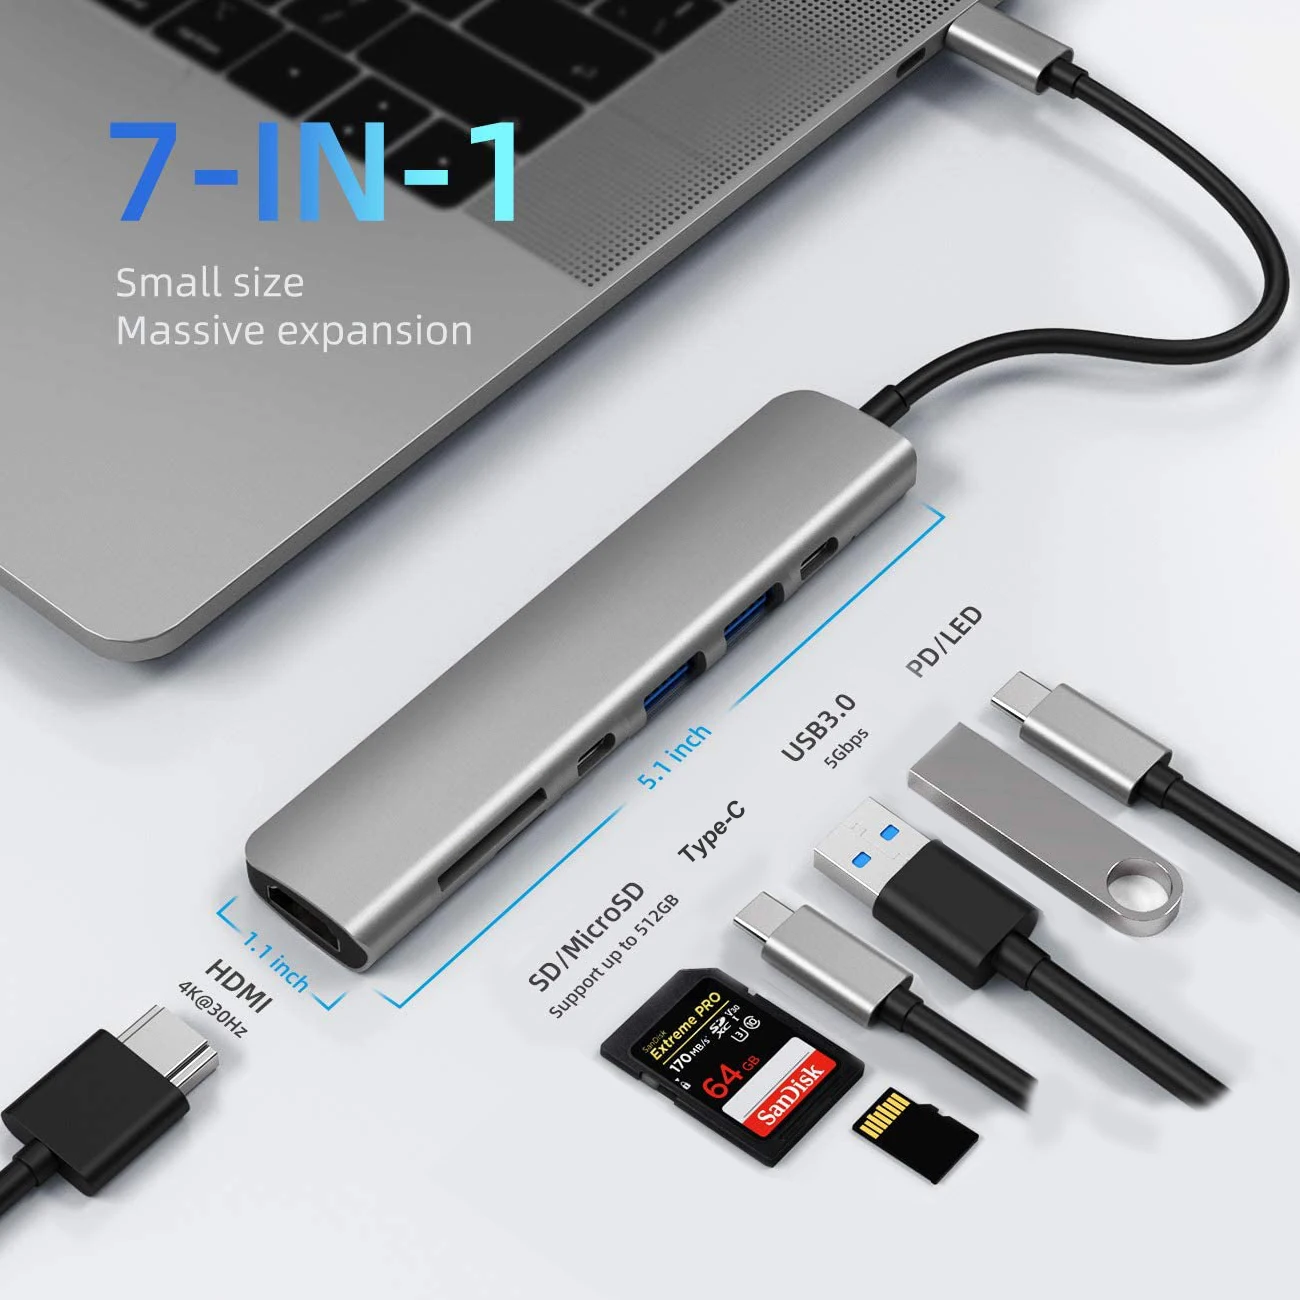 7-in-1 USB Hub Type C Hub Adapter with 4K HDMI USB 3.0 SD/TF Card Reader PD Dock for iPad Pro/ MacBook Pro/Air Thunderbolt 3